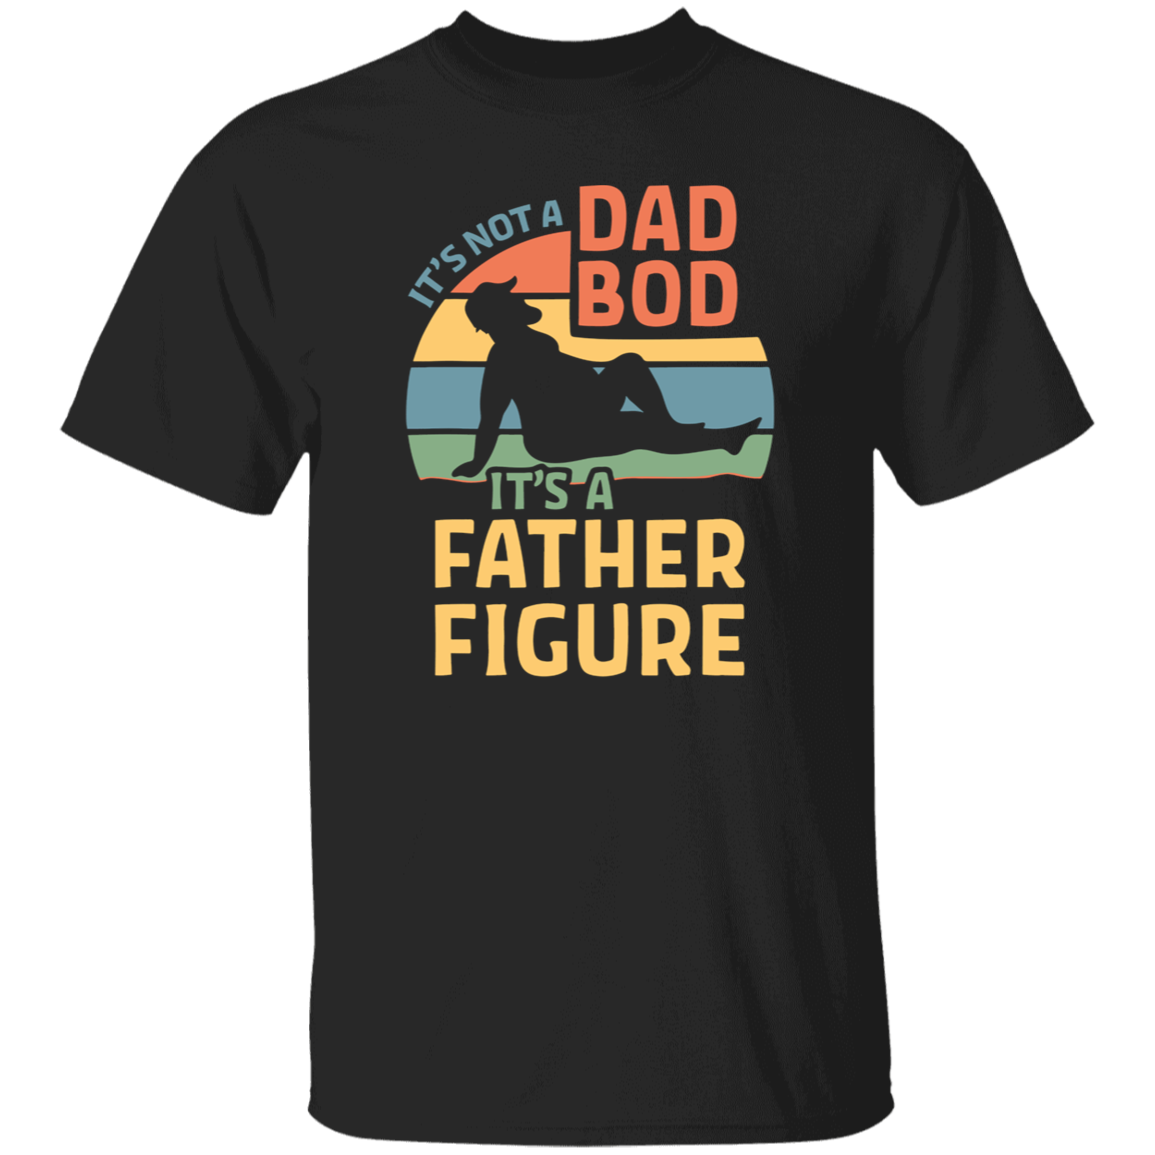 For Dad "FATHER FIGURE" Short Sleeve T-Shirt